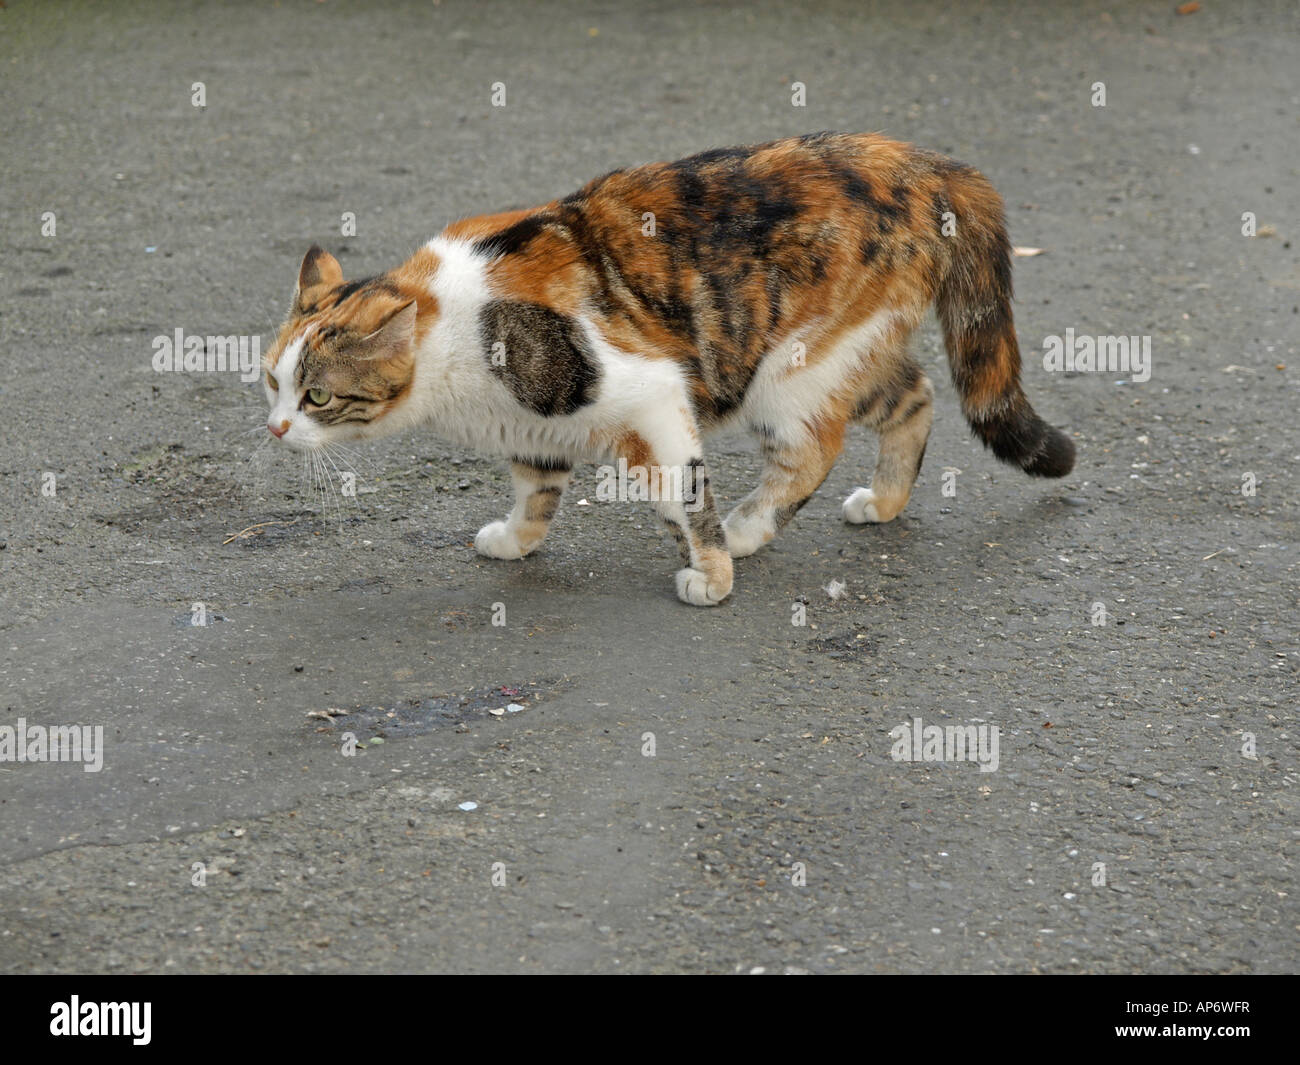 pied street cat looking anxious or aggressiv Stock Photo